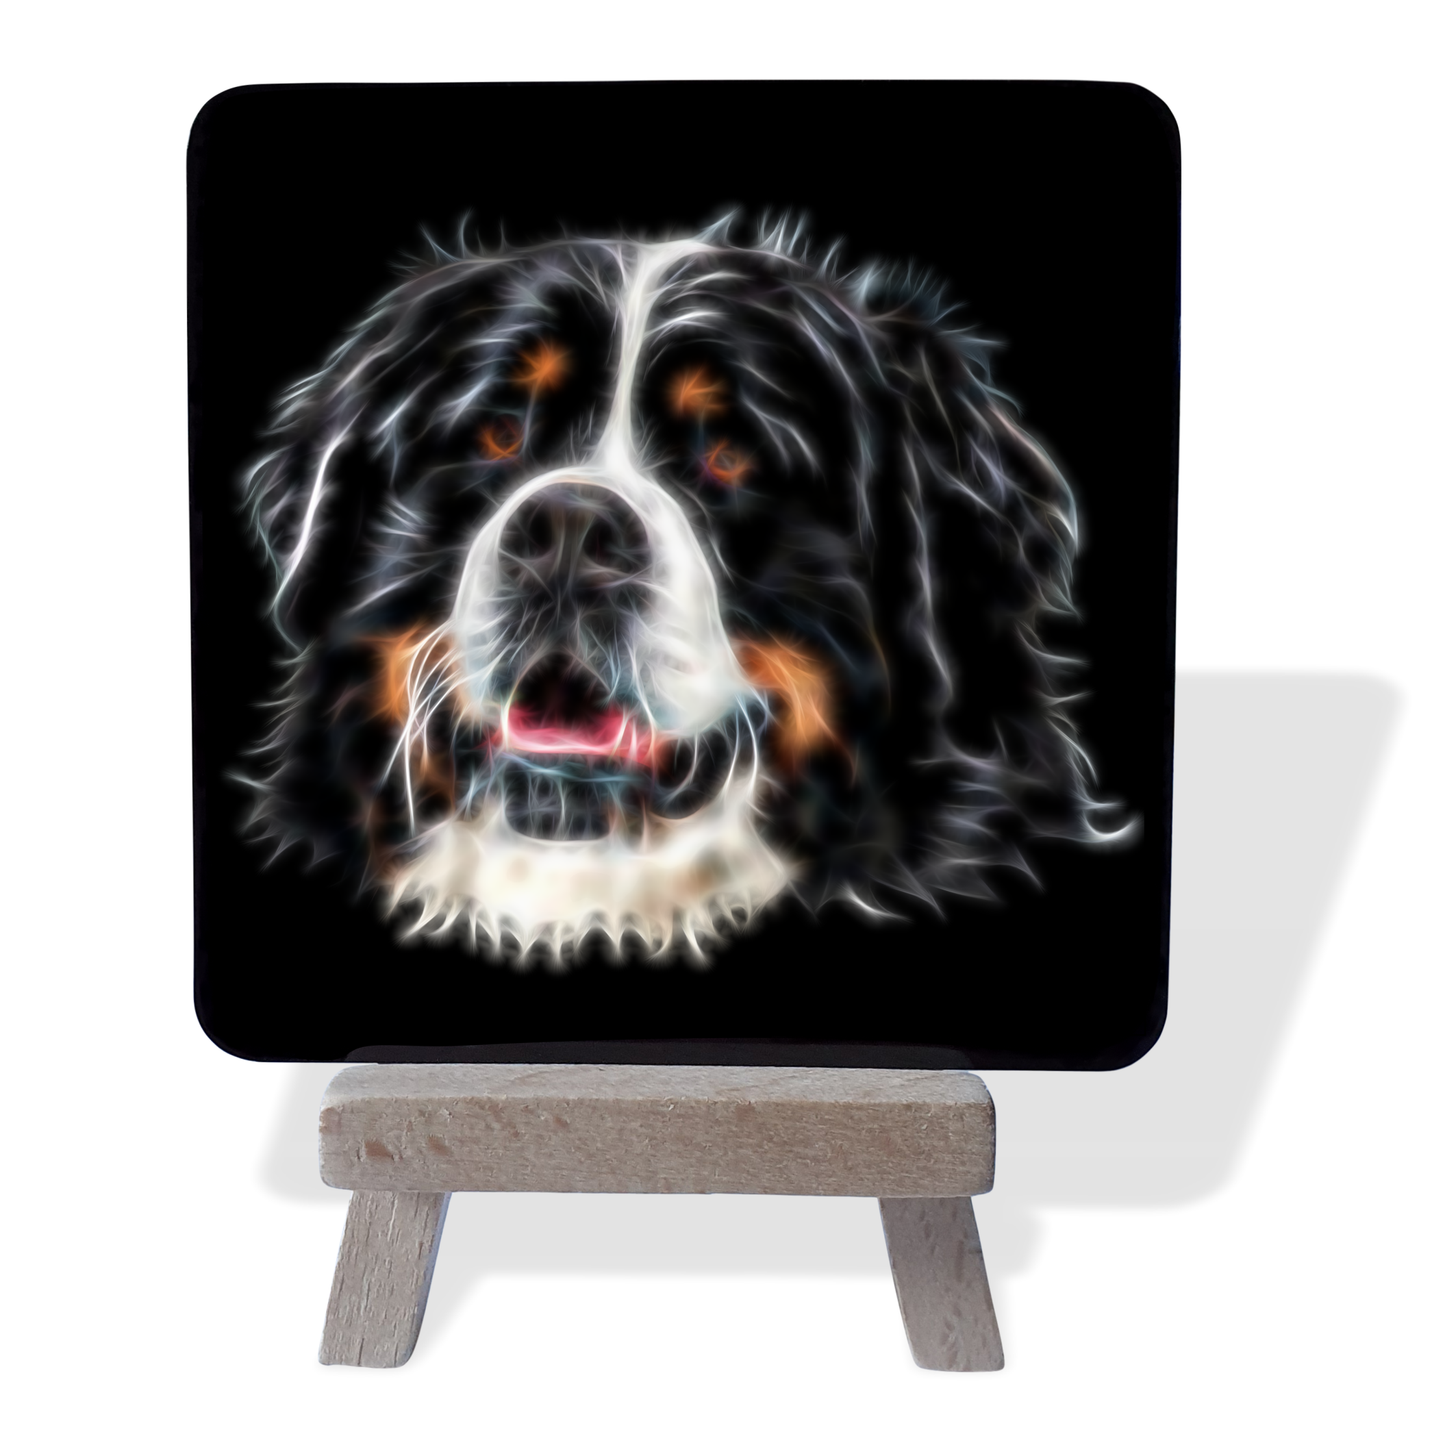 Bernese Mountain Dog Metal Plaque and Mini Easel with Fractal Art Design